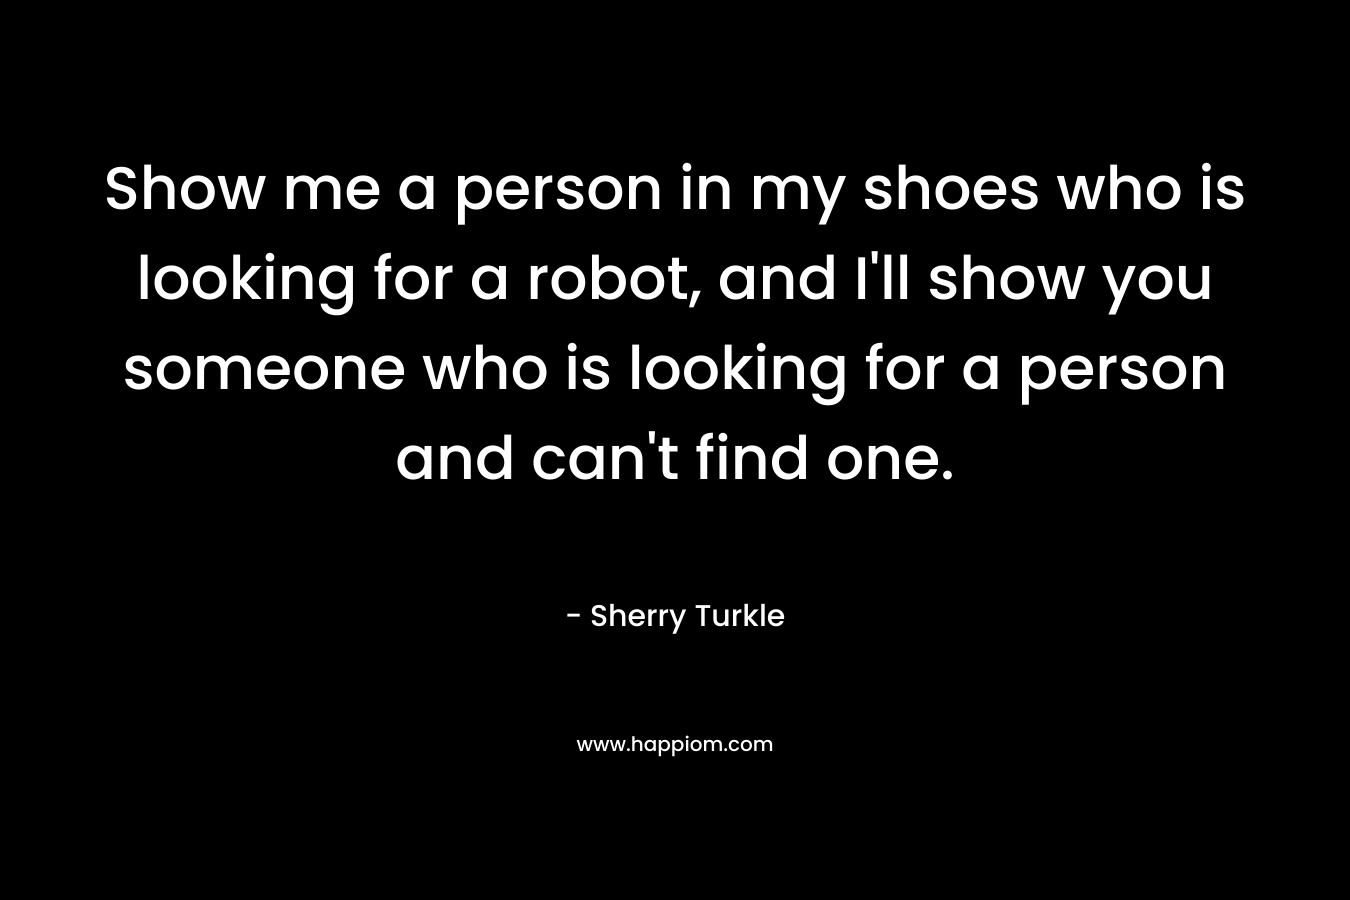 Show me a person in my shoes who is looking for a robot, and I’ll show you someone who is looking for a person and can’t find one. – Sherry Turkle